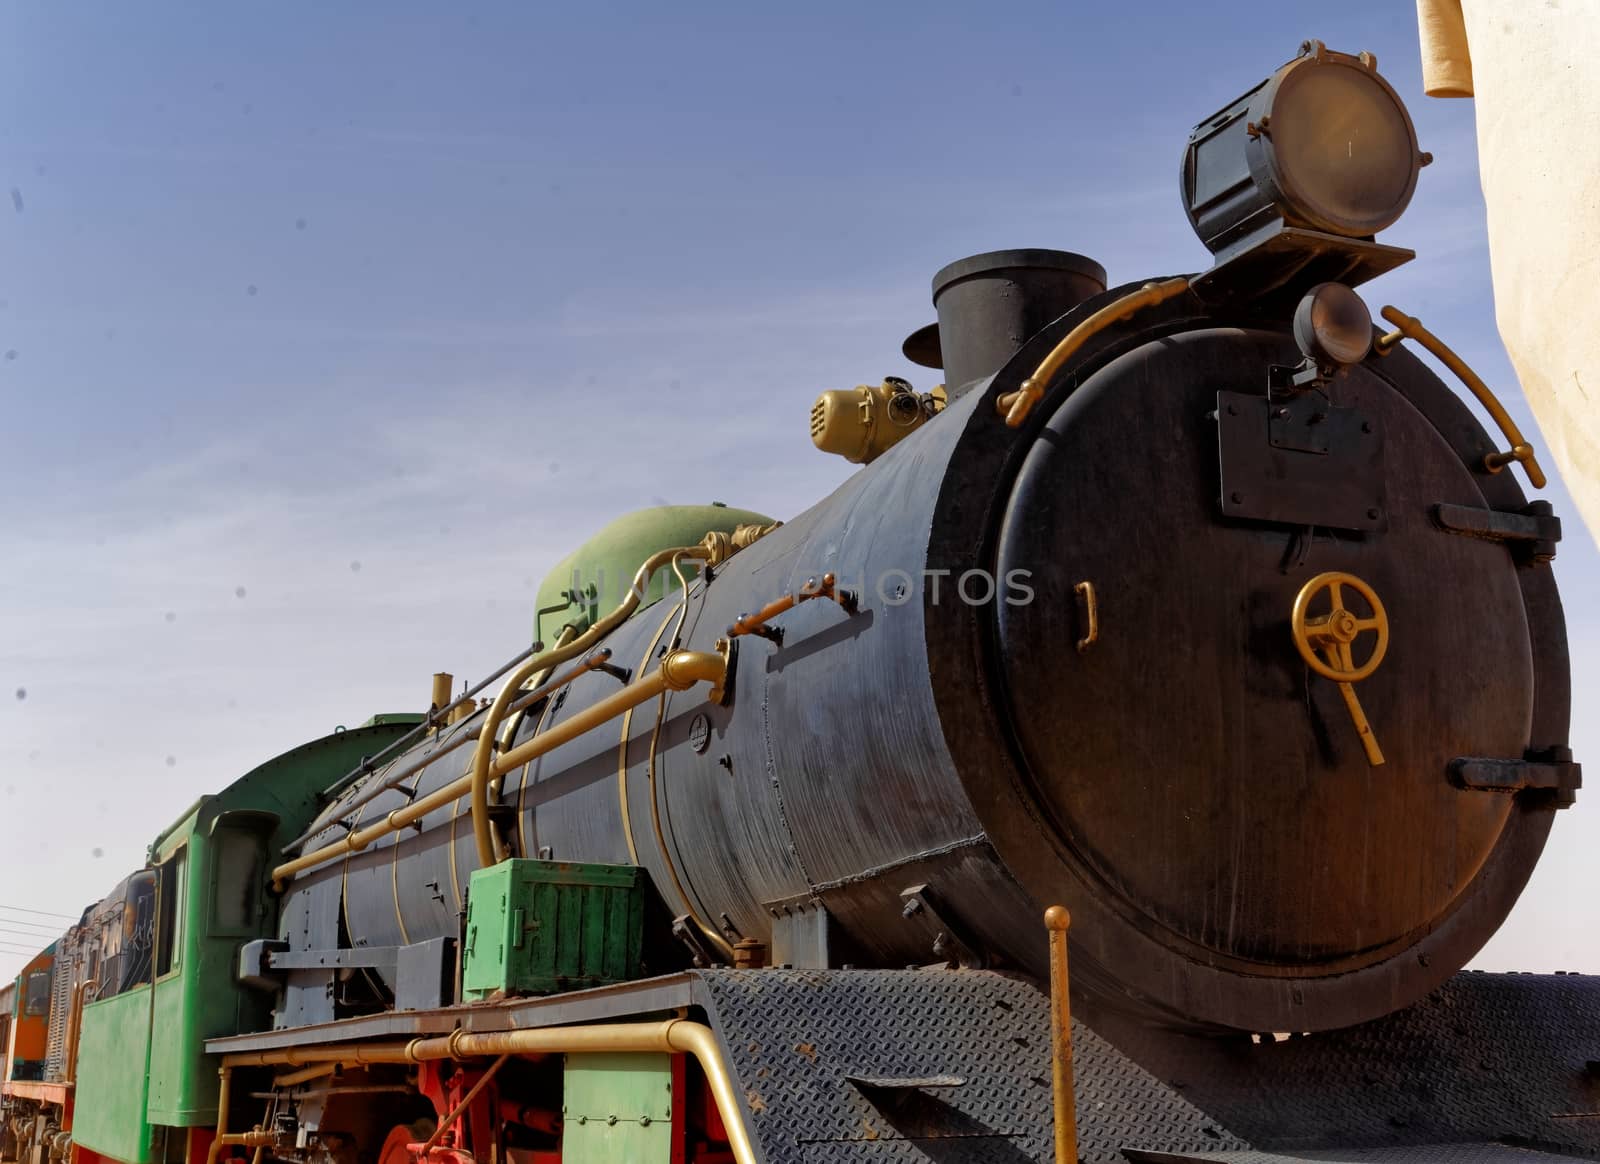 The ancient steam locomotive, still in use, in the desert of Wadi Rum by geogif